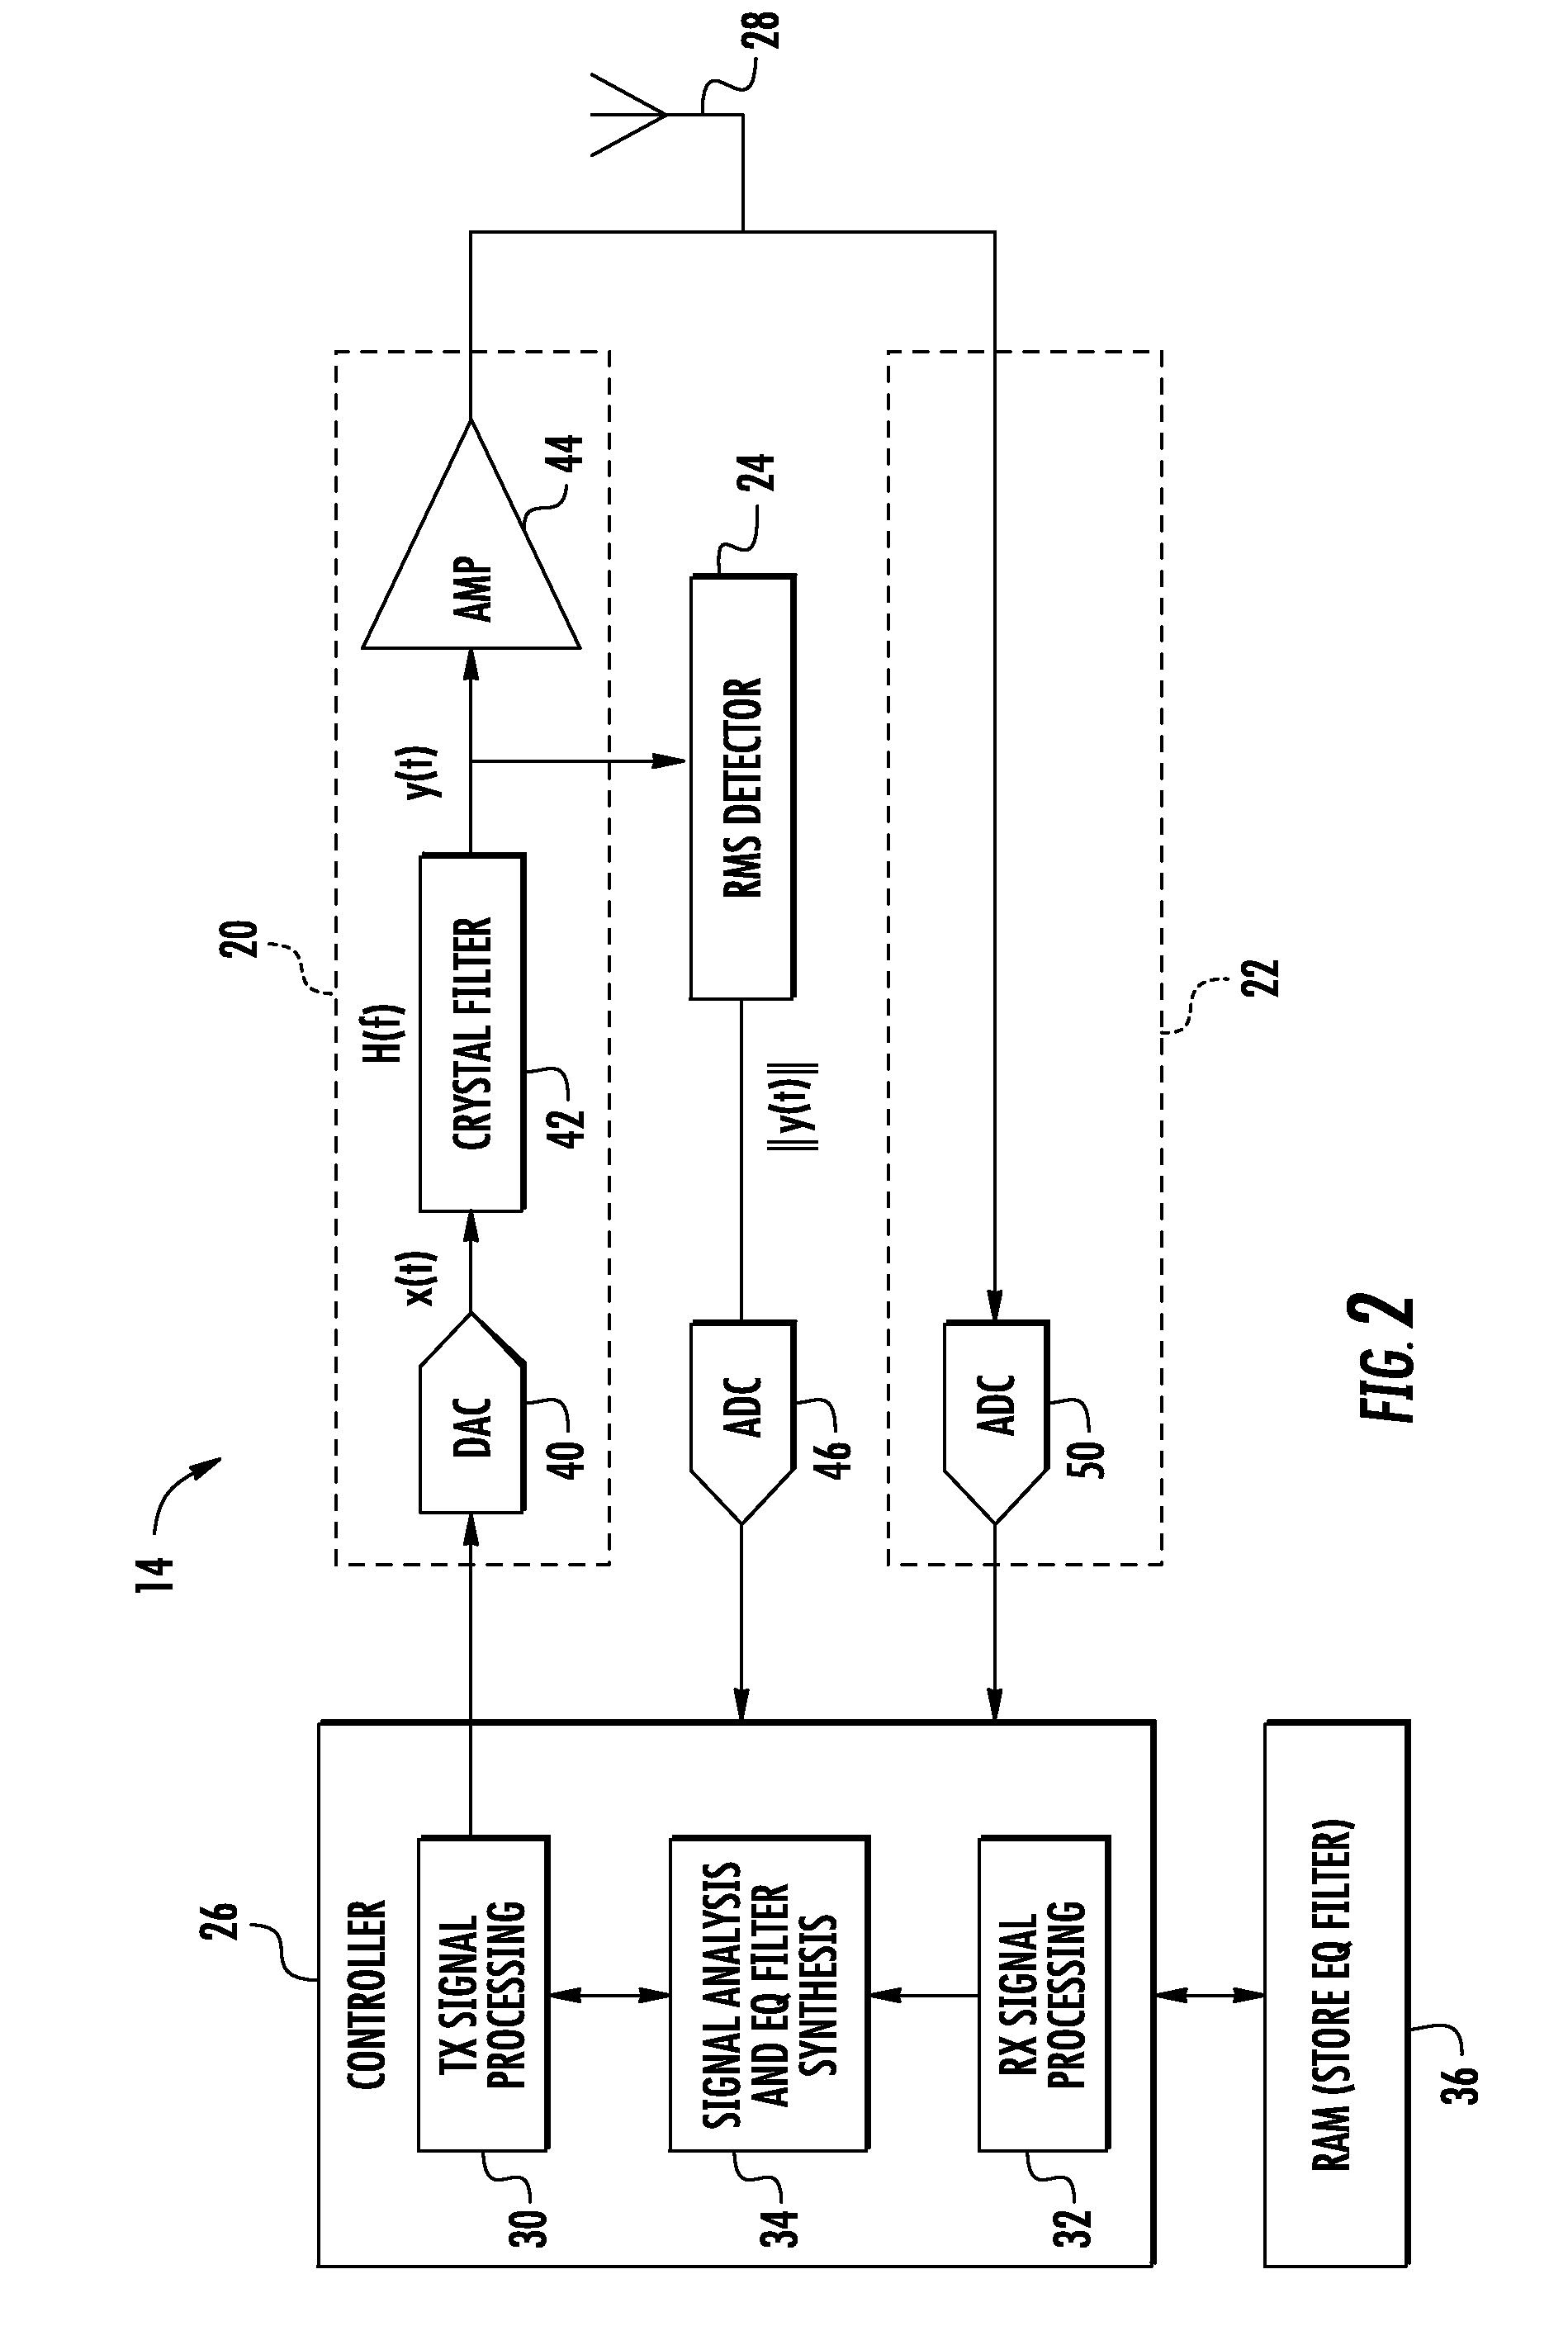 Systems and methods for equalization in radio frequency signal paths